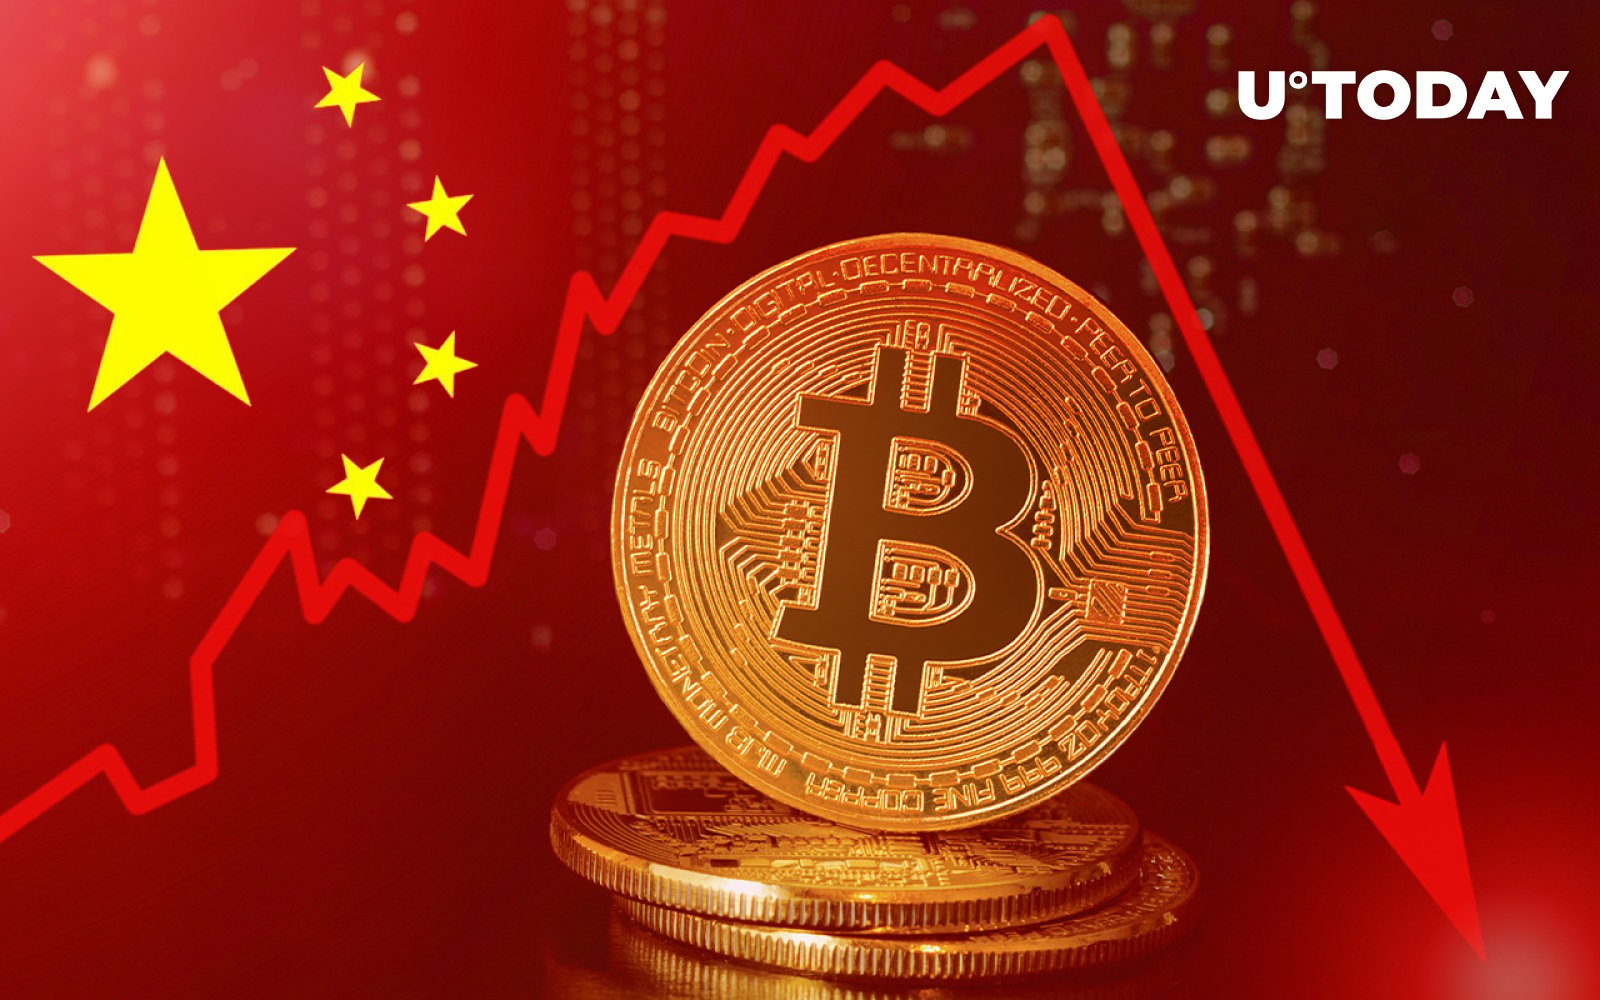 China Communist Party Mouthpiece Warns Bitcoin May Collapse to Zero